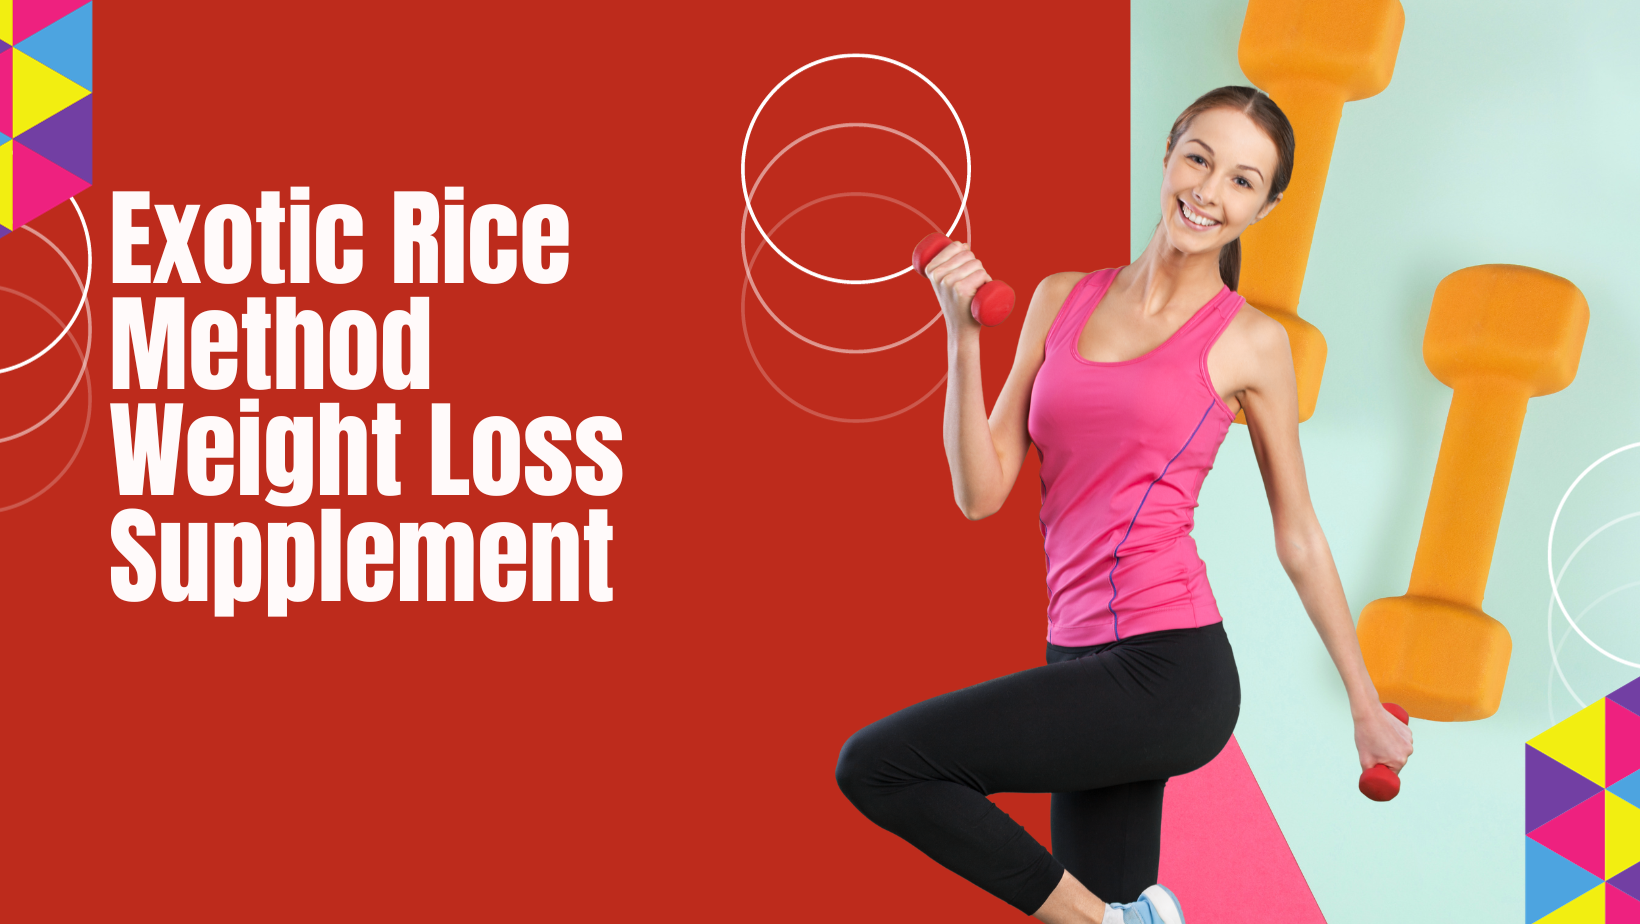 Exotic Rice Method Weight Loss Supplement